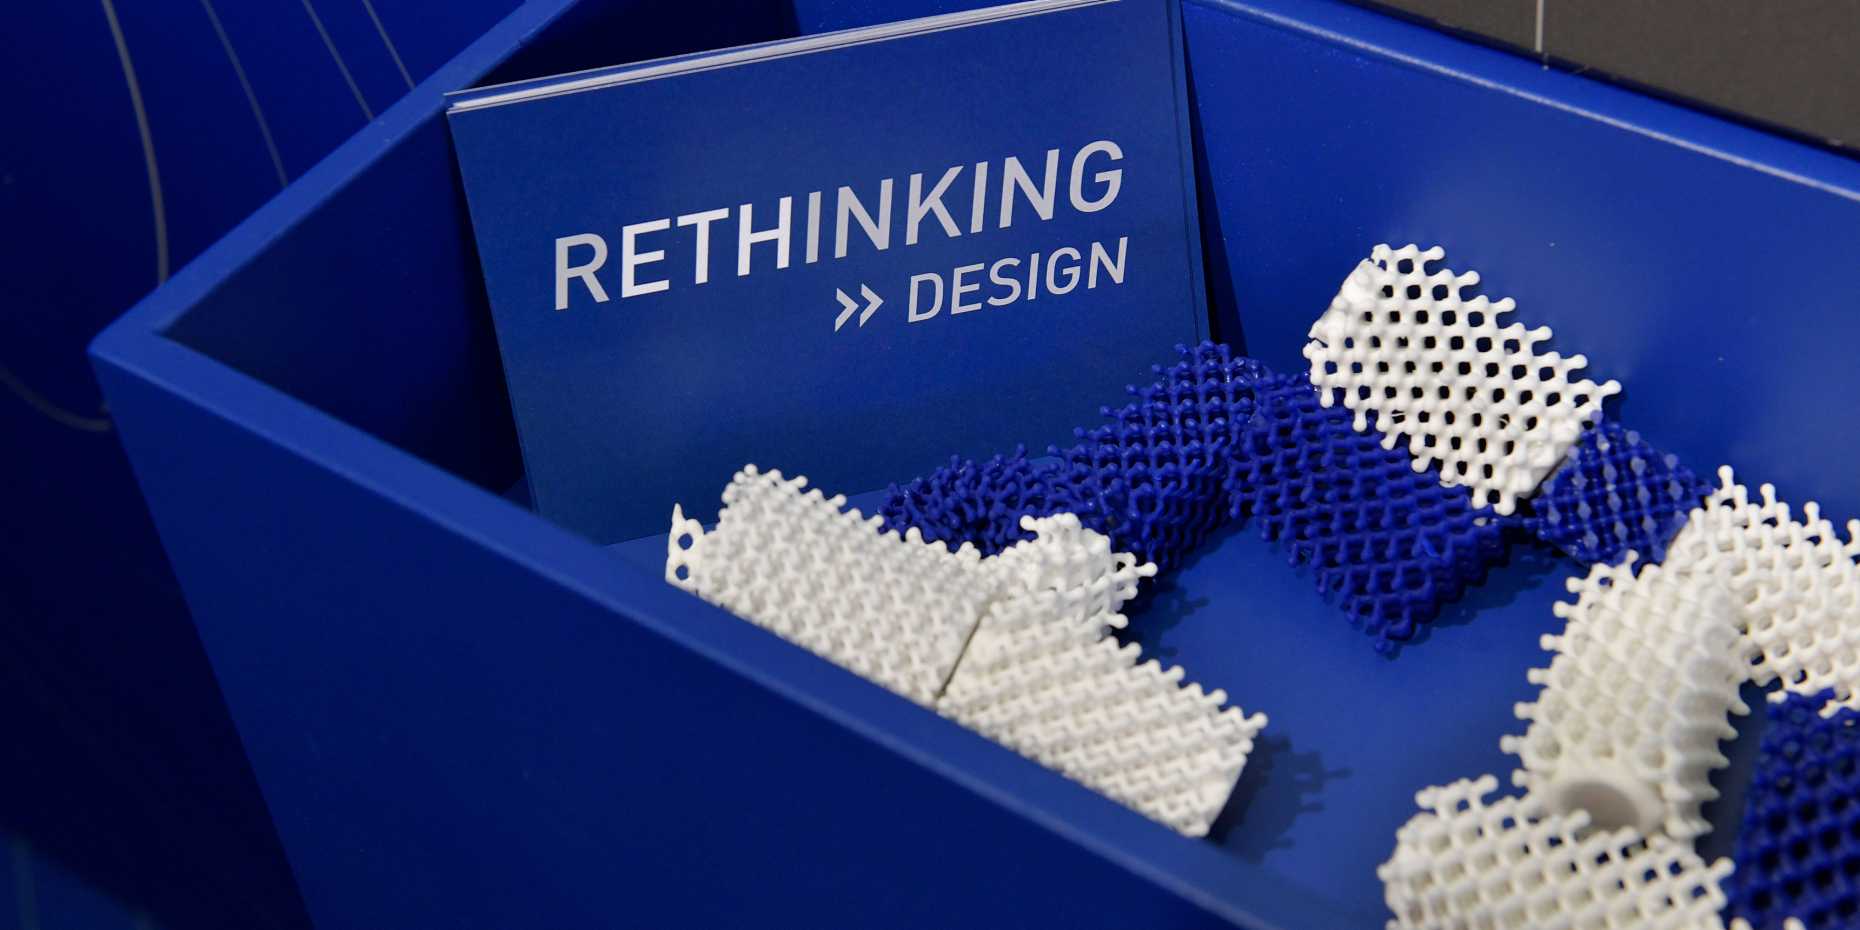 During the «Rethinking Design» exhibition, ETH spin off Spectroplast presented flexible, 3D printed silicone components. (Photo: ETH Zurich / Andreas Eggenberger)